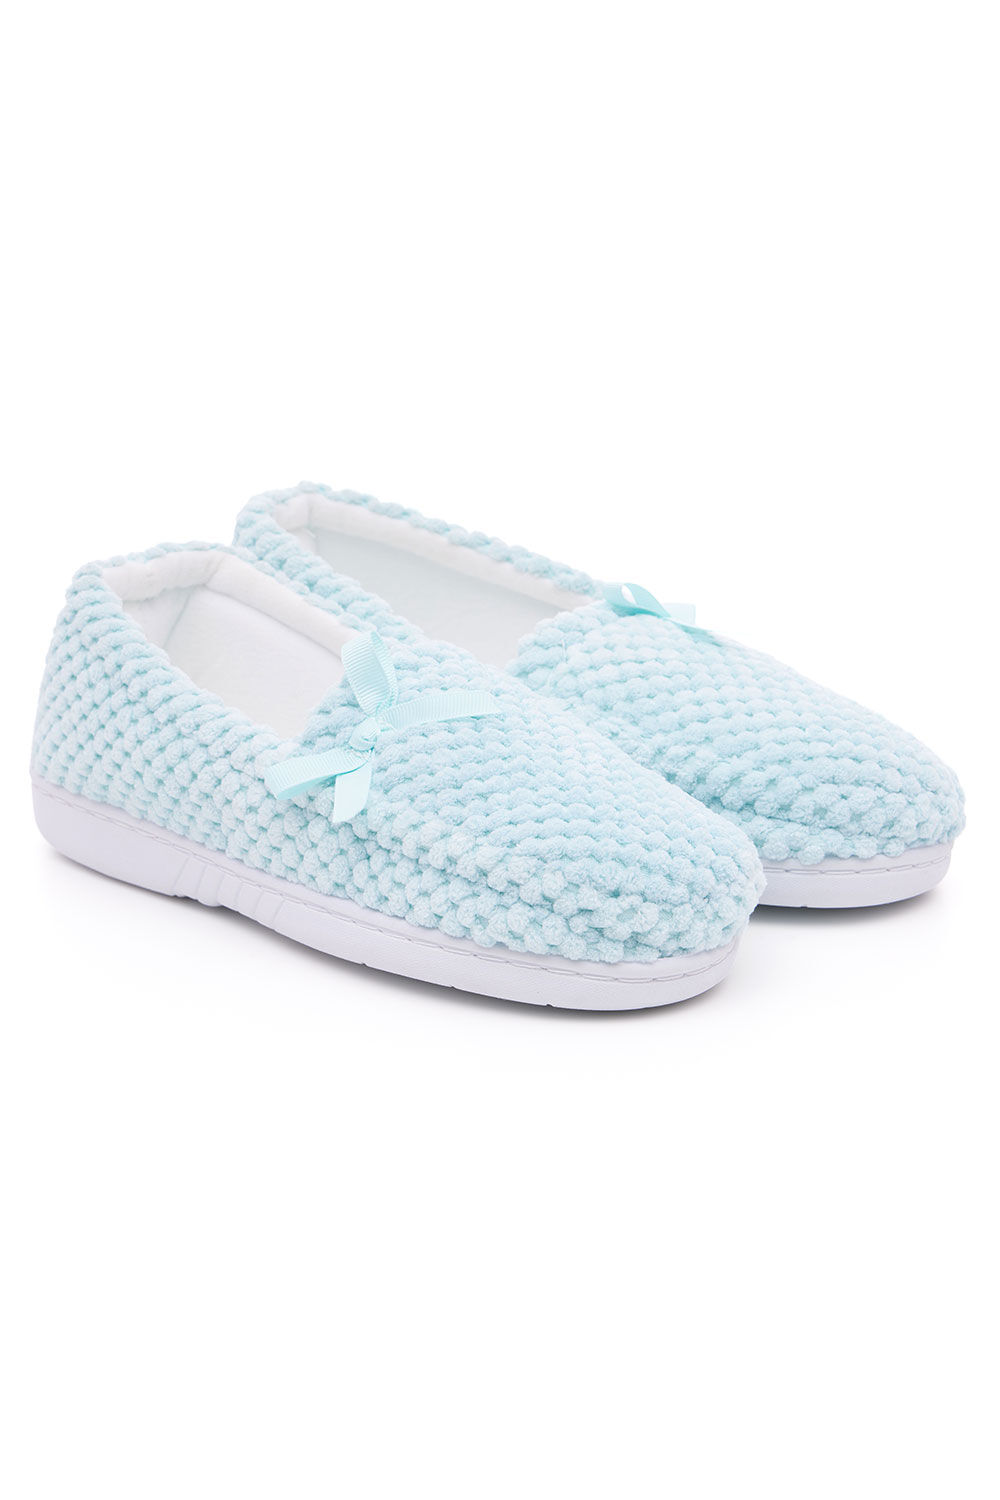 Bonmarche Blue Fleece Moccasin Slippers With Bow Detail, Size: 7